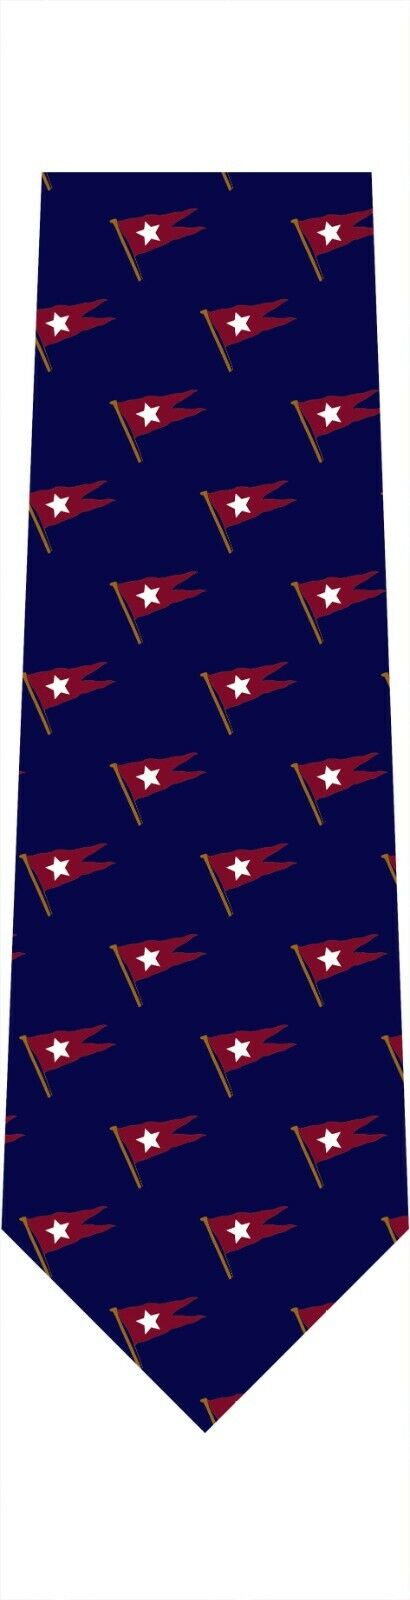 RMS TITANIC WHITE STAR LINE PATTERNED NECK TIE WITH BURGEE FLAGS A CLASSIC GIFT